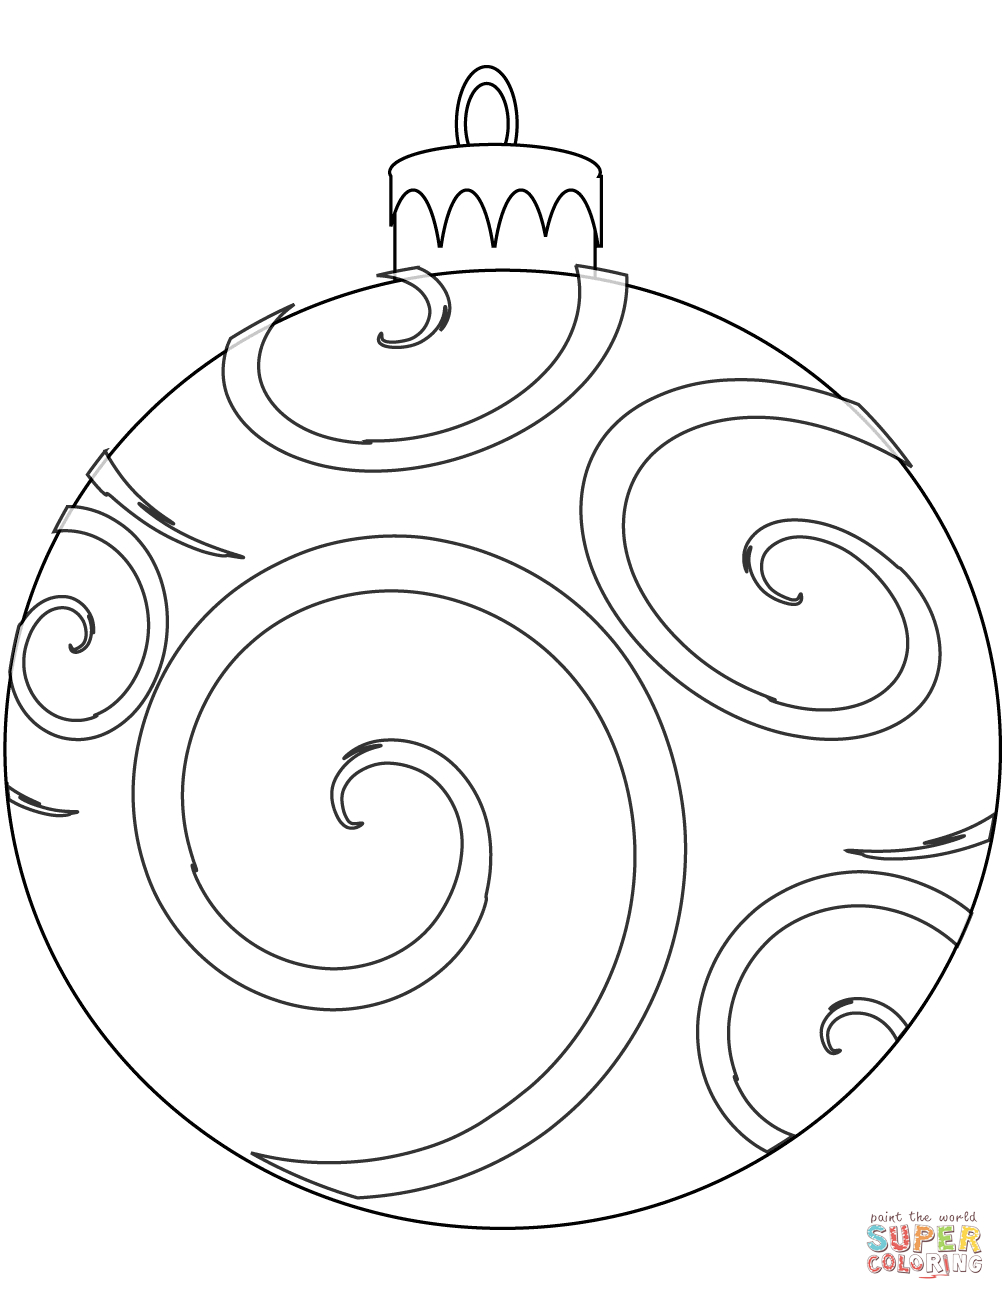 Holiday Ornament Coloring Page | Free Printable Coloring Pages - Free Printable Christmas Ornament Coloring Pages